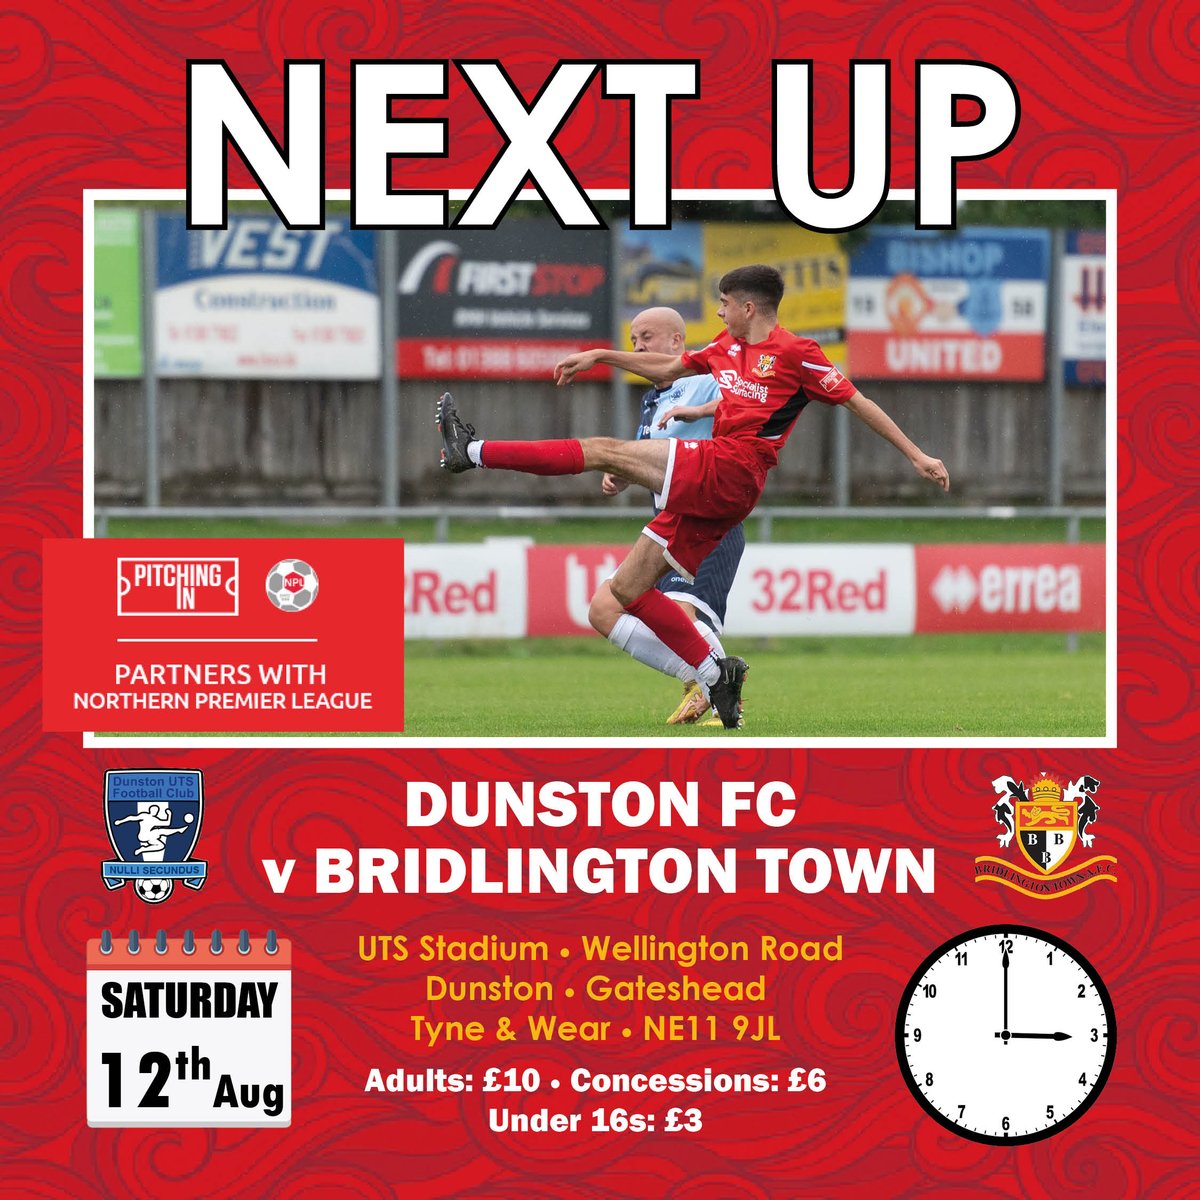 NEXT UP | An away game against @DunstonUTSFC as we look to bounce back from Saturday's FA Cup defeat. 🆚 Dunston FC ⏰ 3pm 🎟 £10 / £6 / £3 📍 UTS Stadium 📅 Saturday 12th August 📸 @JoeGorman_ 🔴⚪ #SeaSeaSeasiders